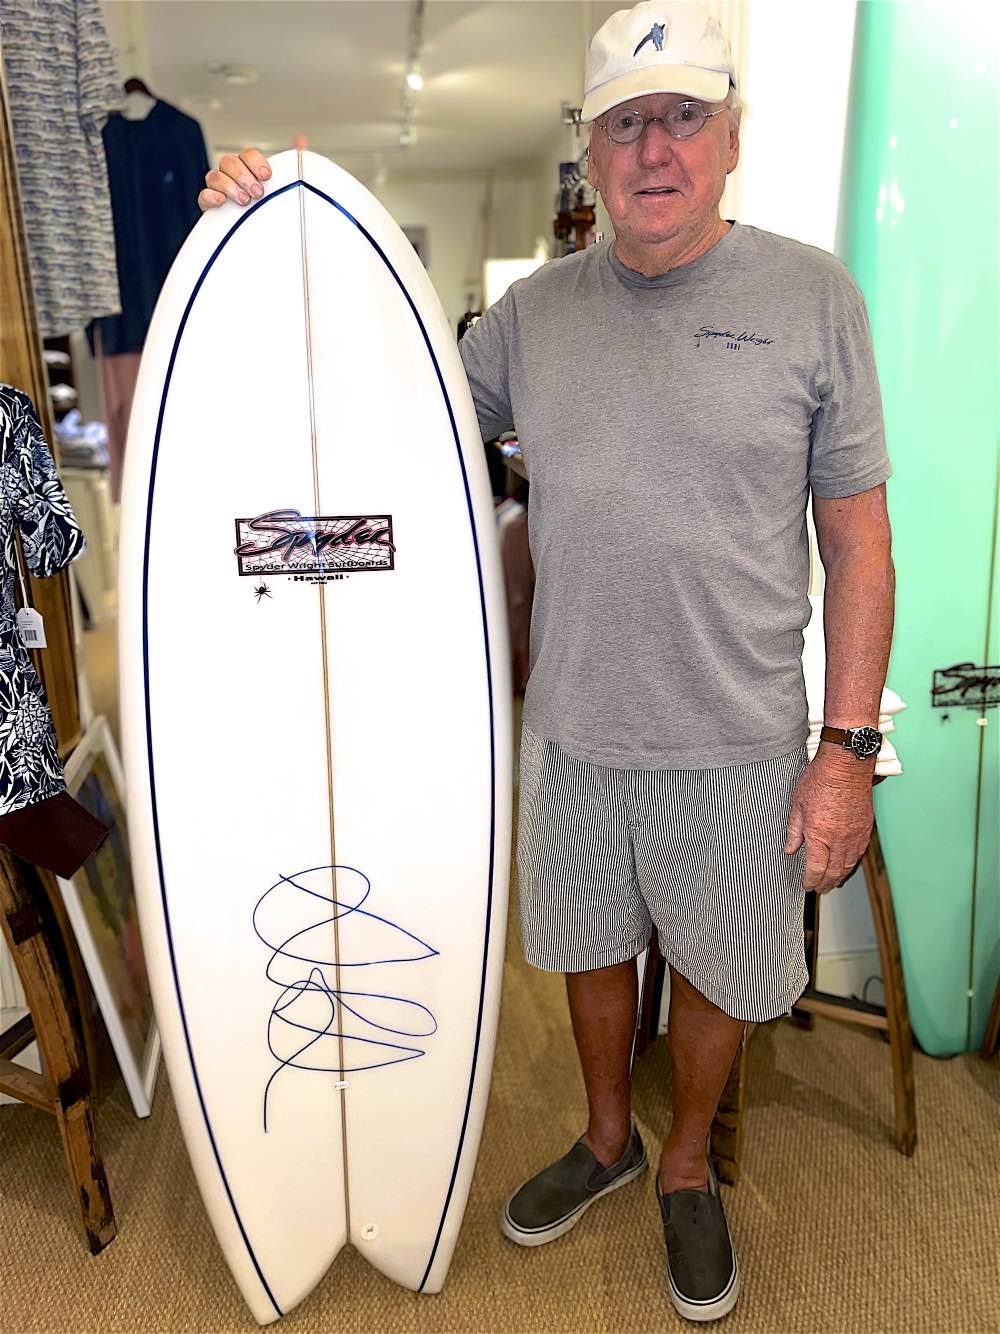 Spyder Wright – East Coast Surfing Hall of Fame